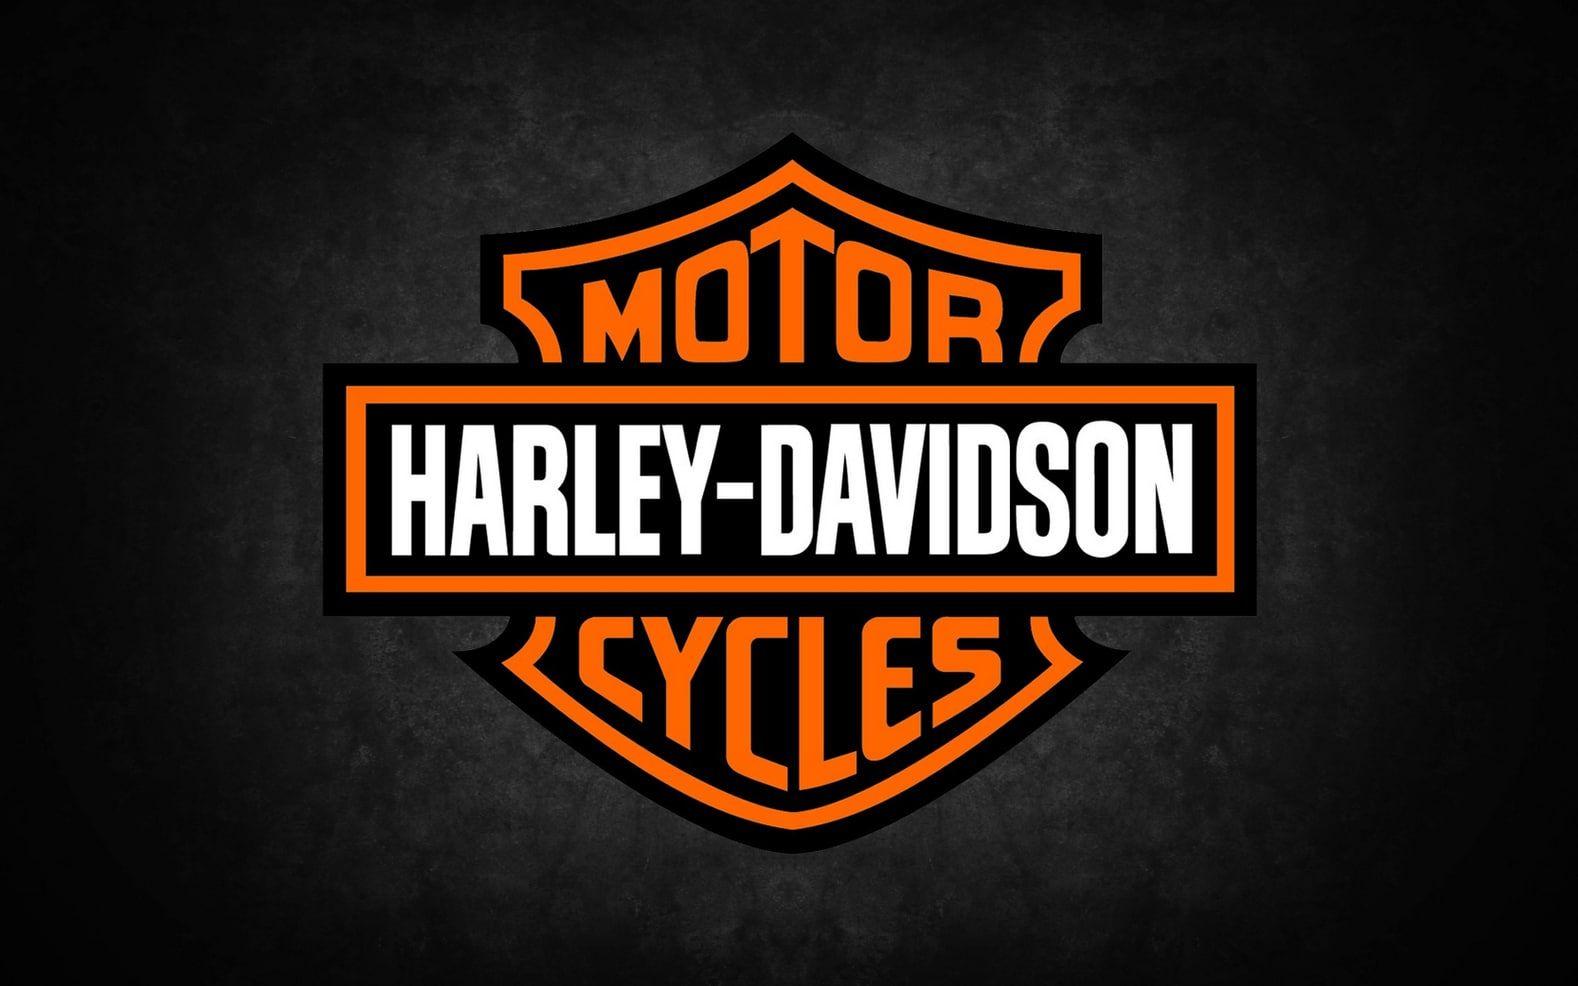 Harley Davidson Football Logo - Born In The USA: Get Your Motor Running With The Harley Davidson ...